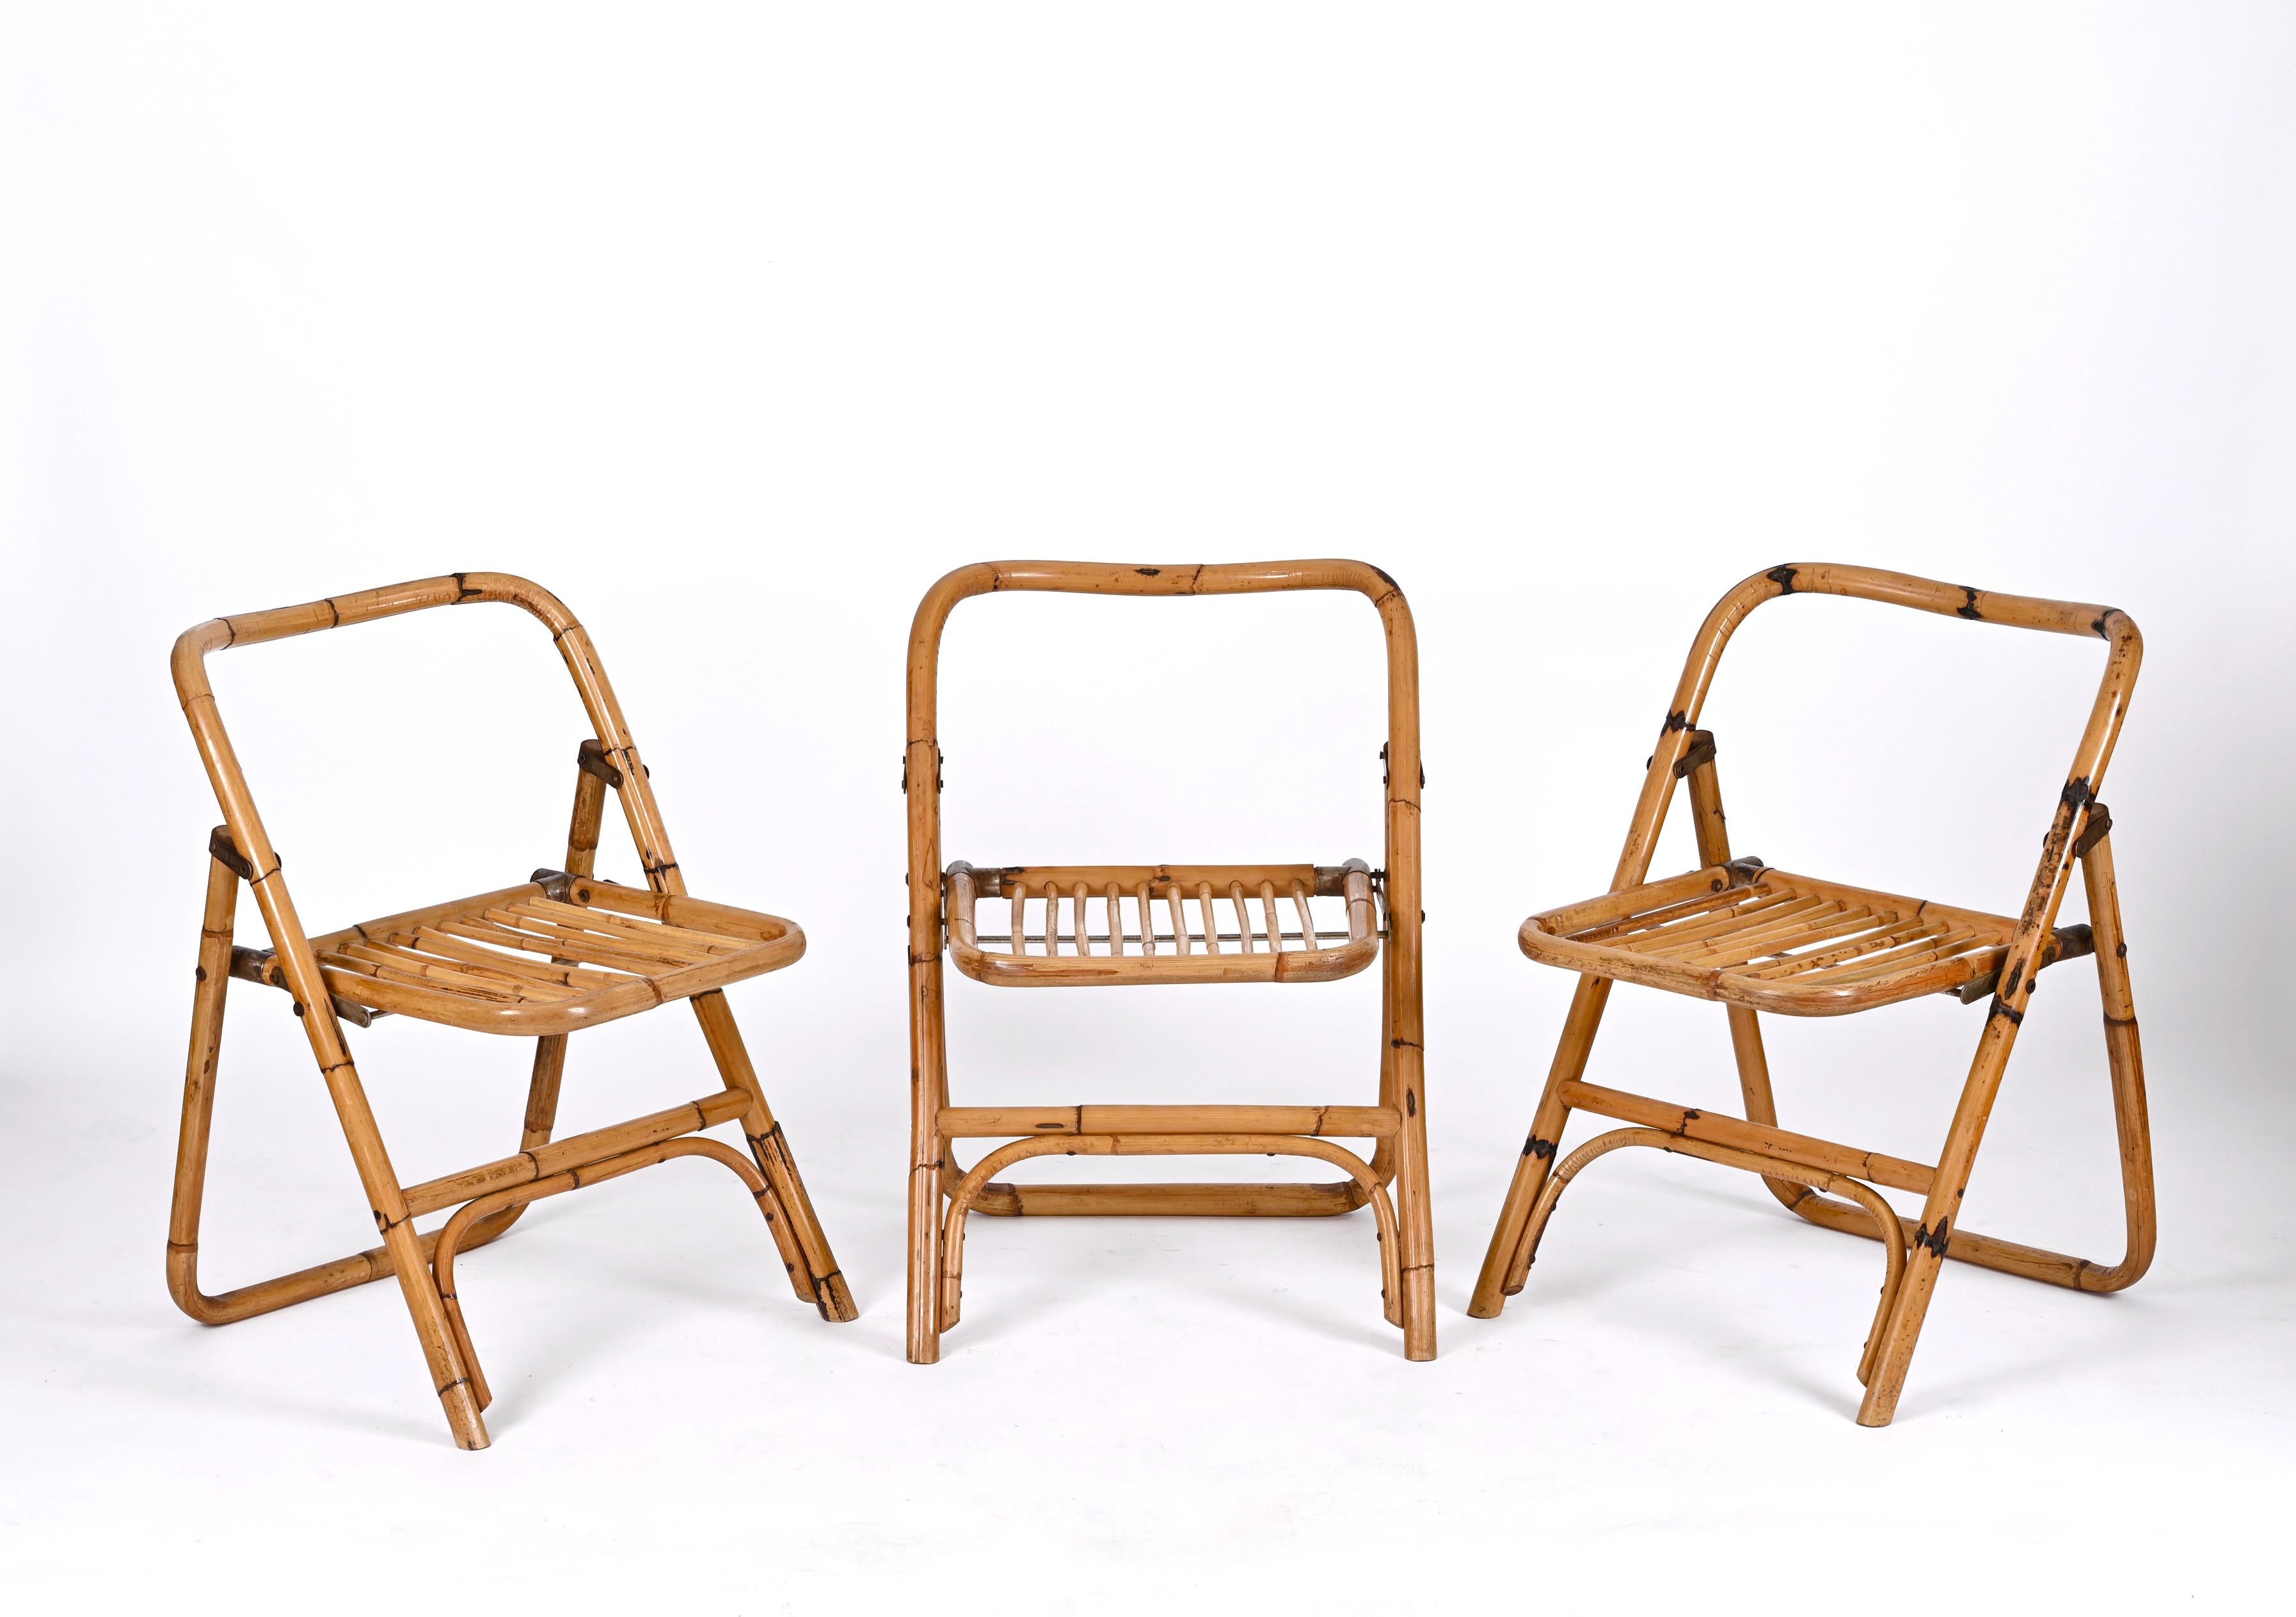 Mid-20th Century Dal Vera Bamboo Folding Chairs, Italy, 1960s For Sale